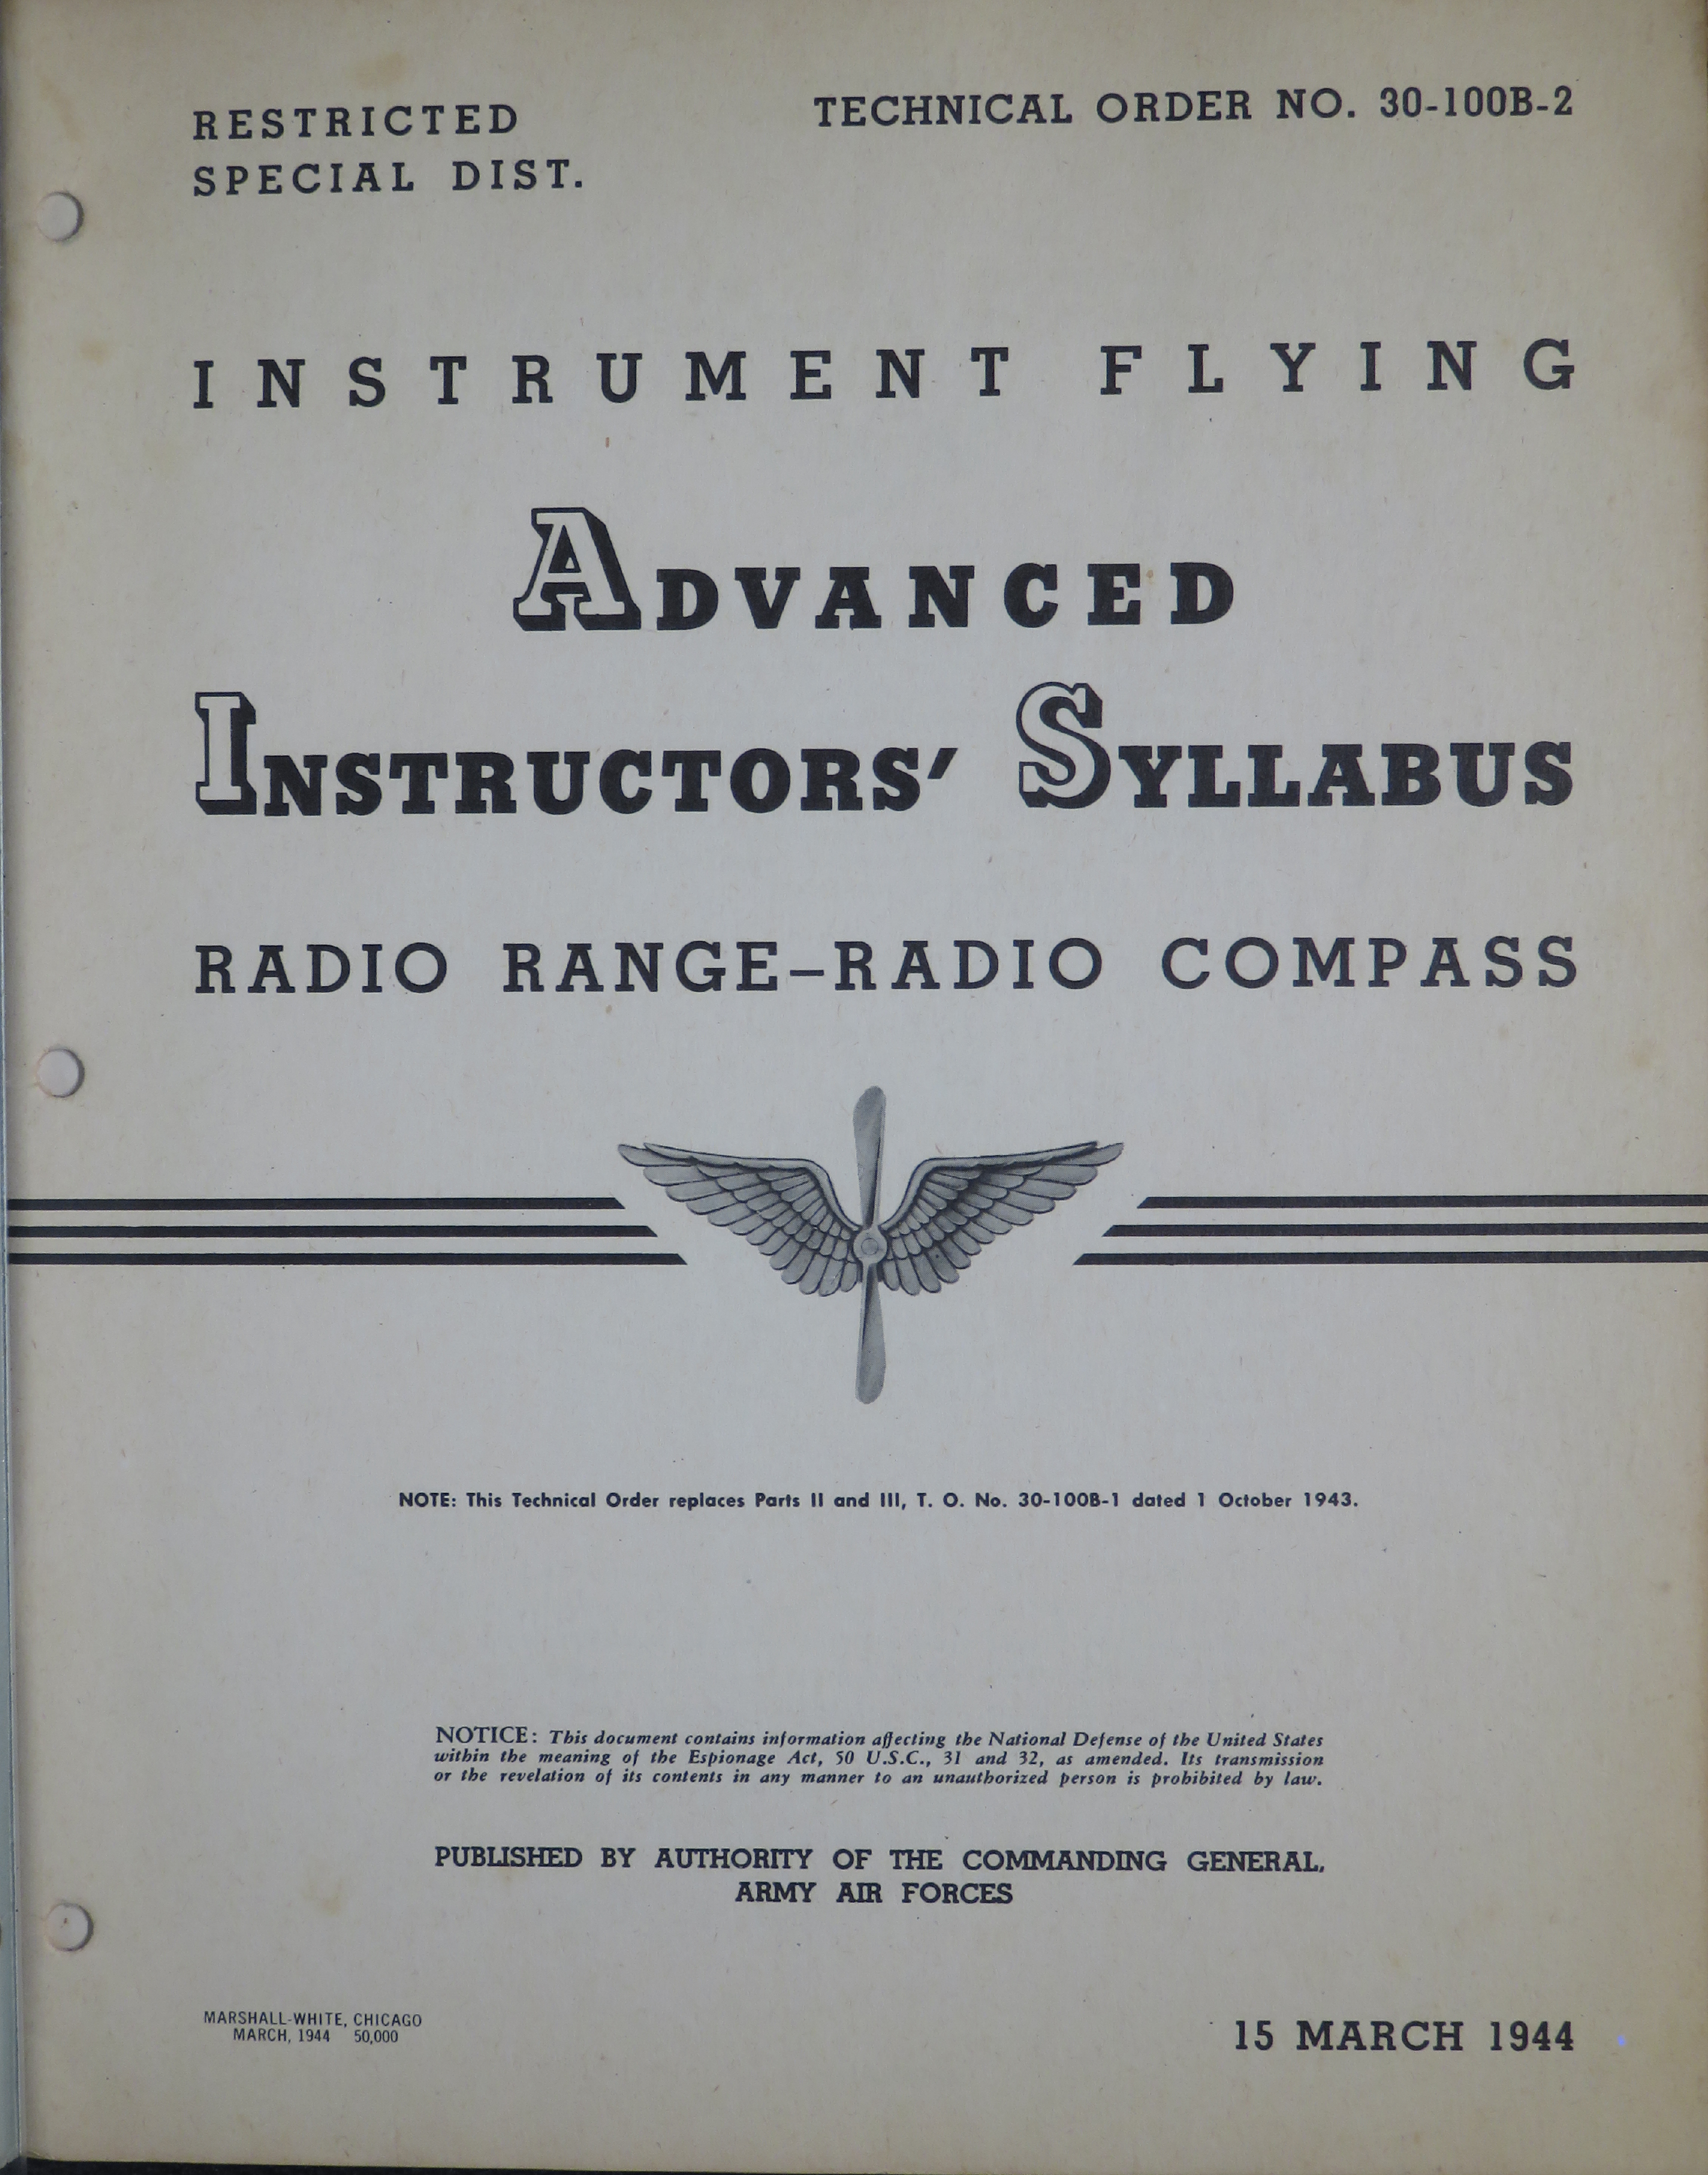 Sample page 3 from AirCorps Library document: Instructors' Syllabus for Advanced Instrument Flying